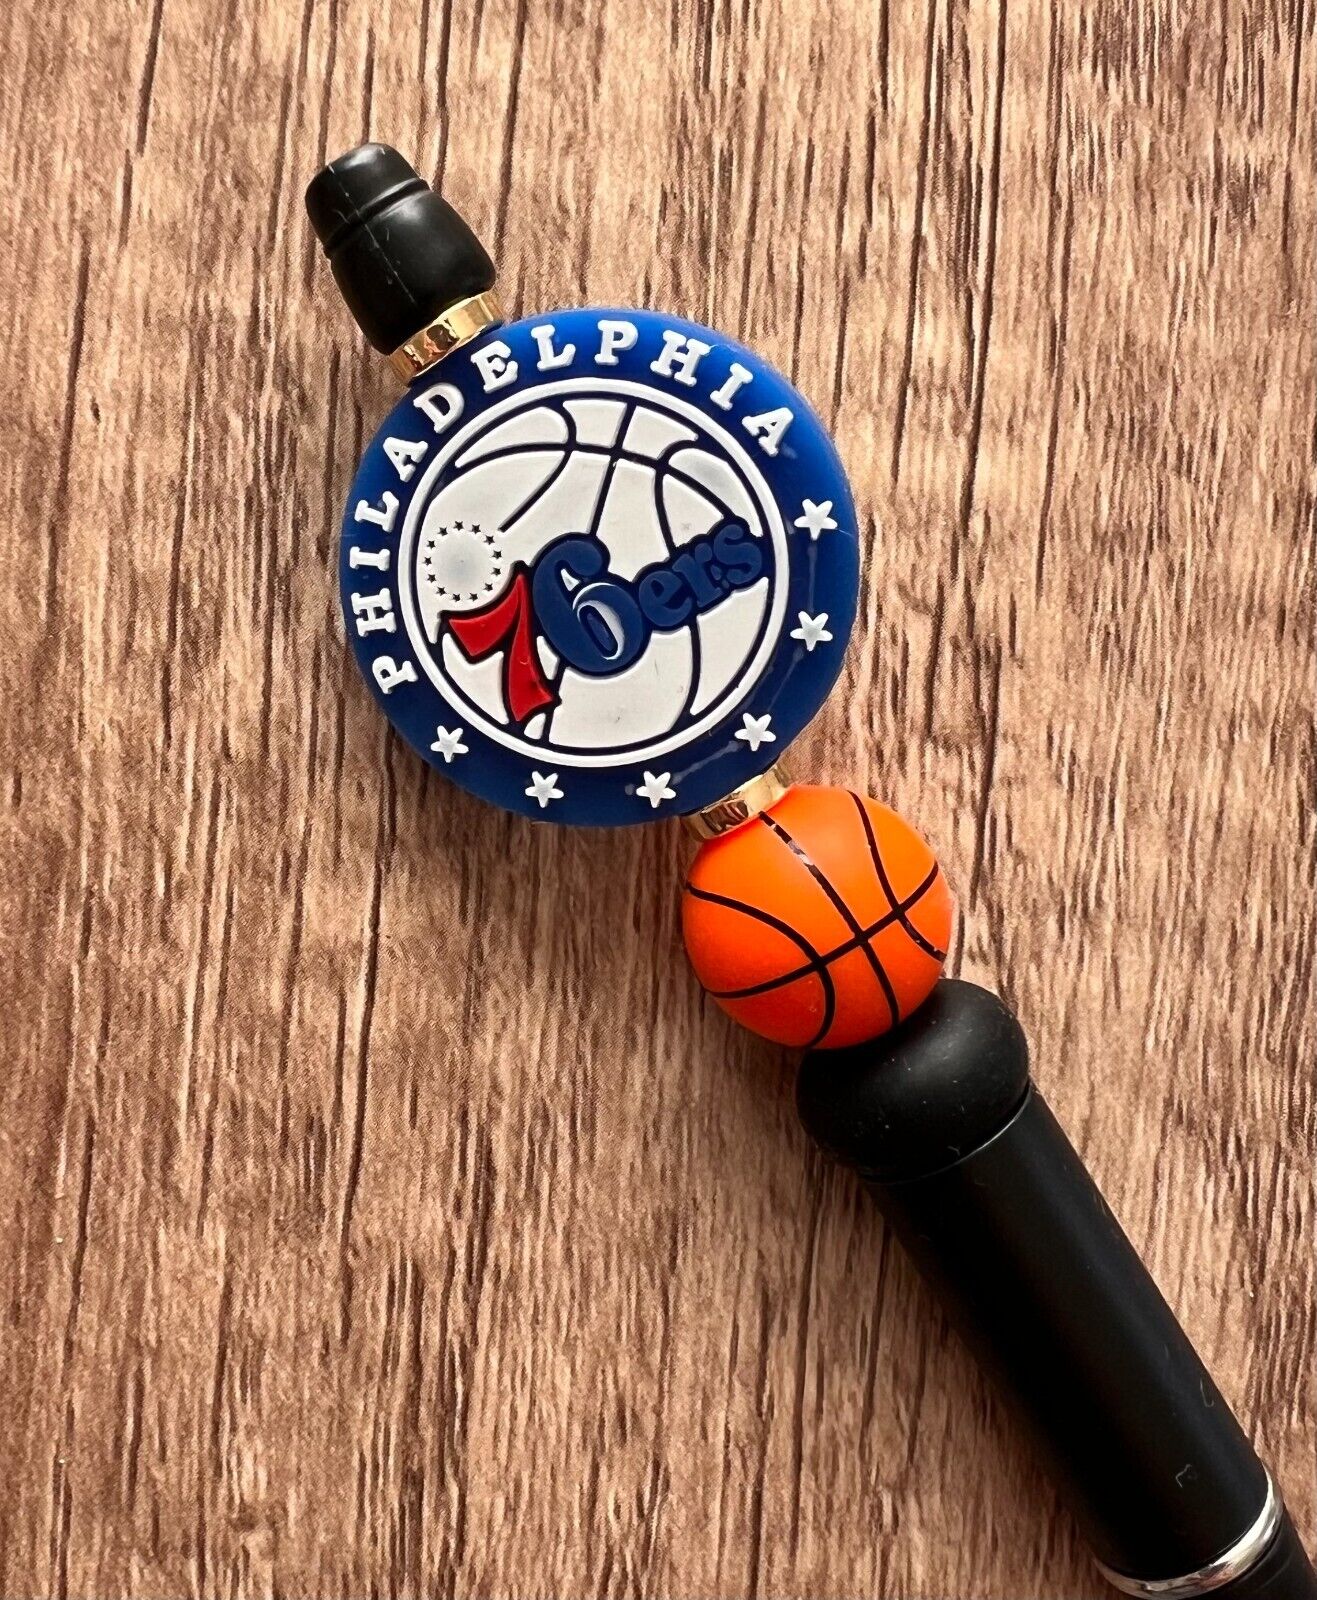 Basketball pen 76ers, Nuggets, Spurs, Lakers, & Nets. Fan gifts. Collect